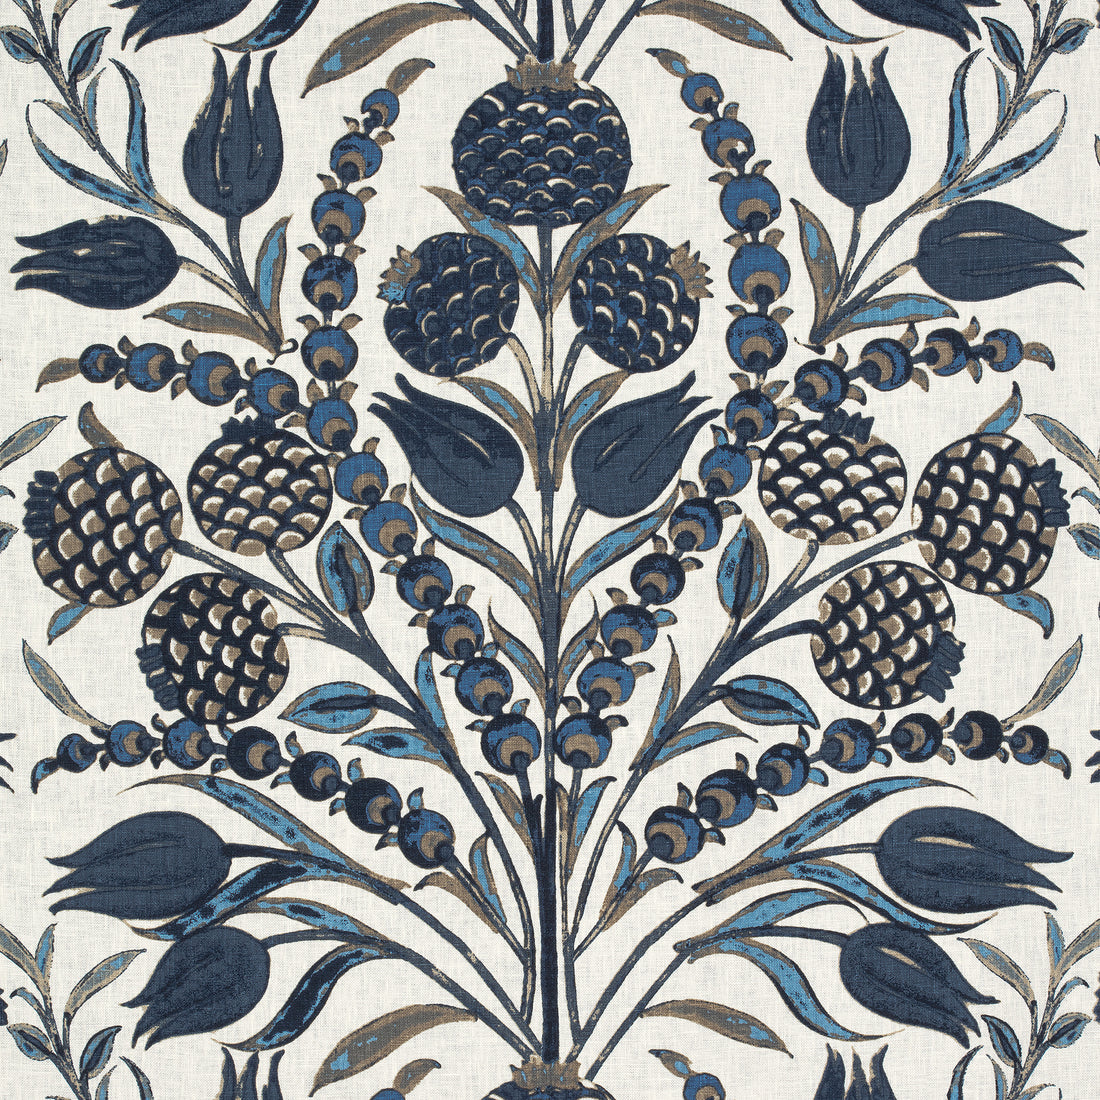 Corneila fabric in navy color - pattern number F972603 - by Thibaut in the Chestnut Hill collection